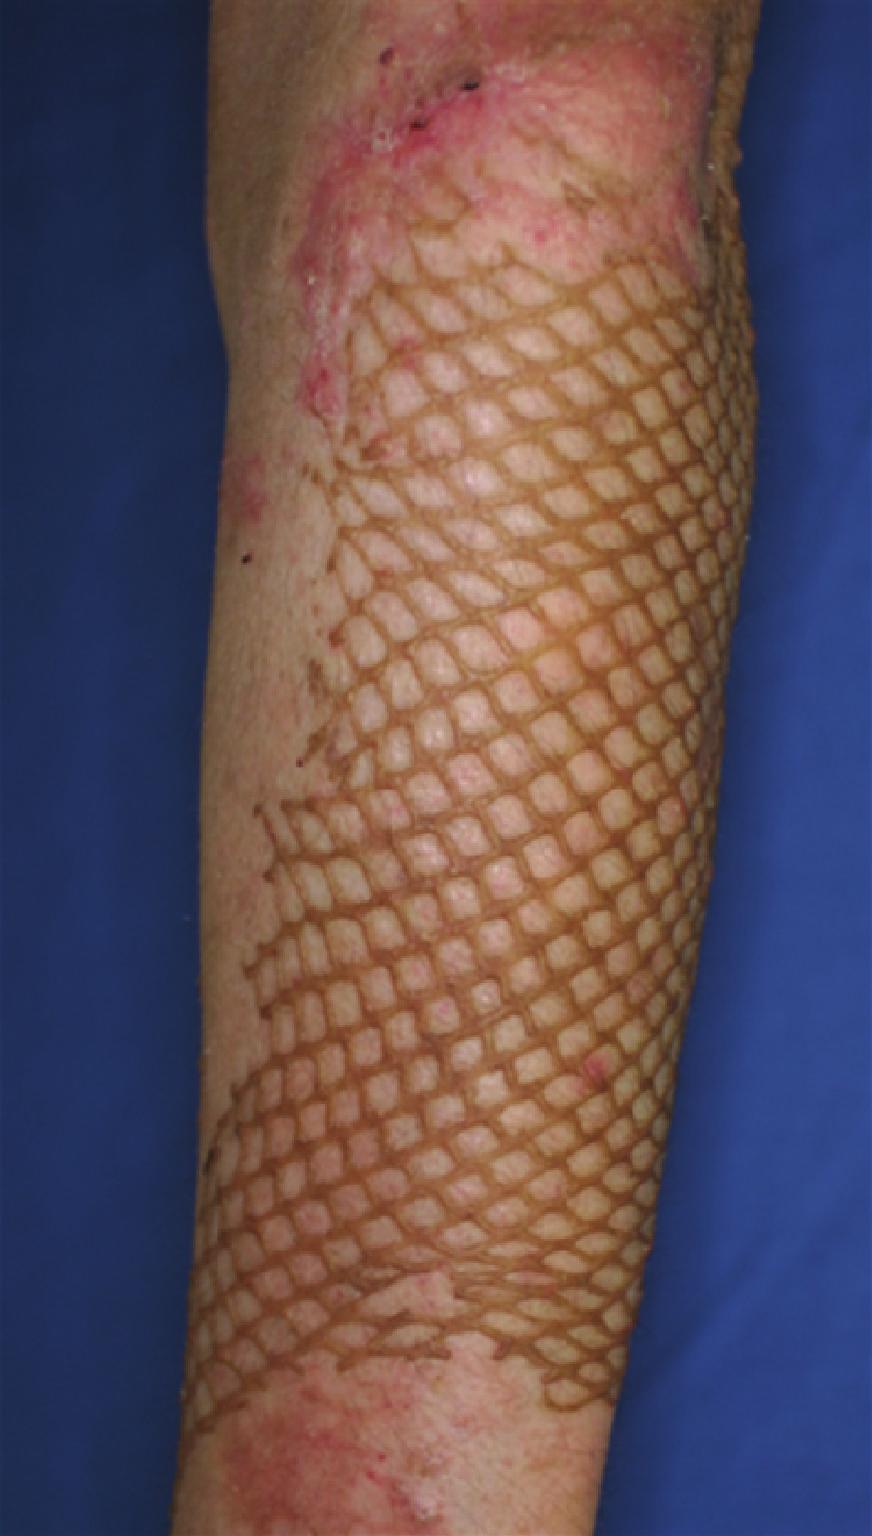 Plastic Surgery International Figure : Twenty eight-year-old male, mesh skin grafted scars on left forearm (deep burn caused by explosion, age of scar was months) before and after eight treatment.